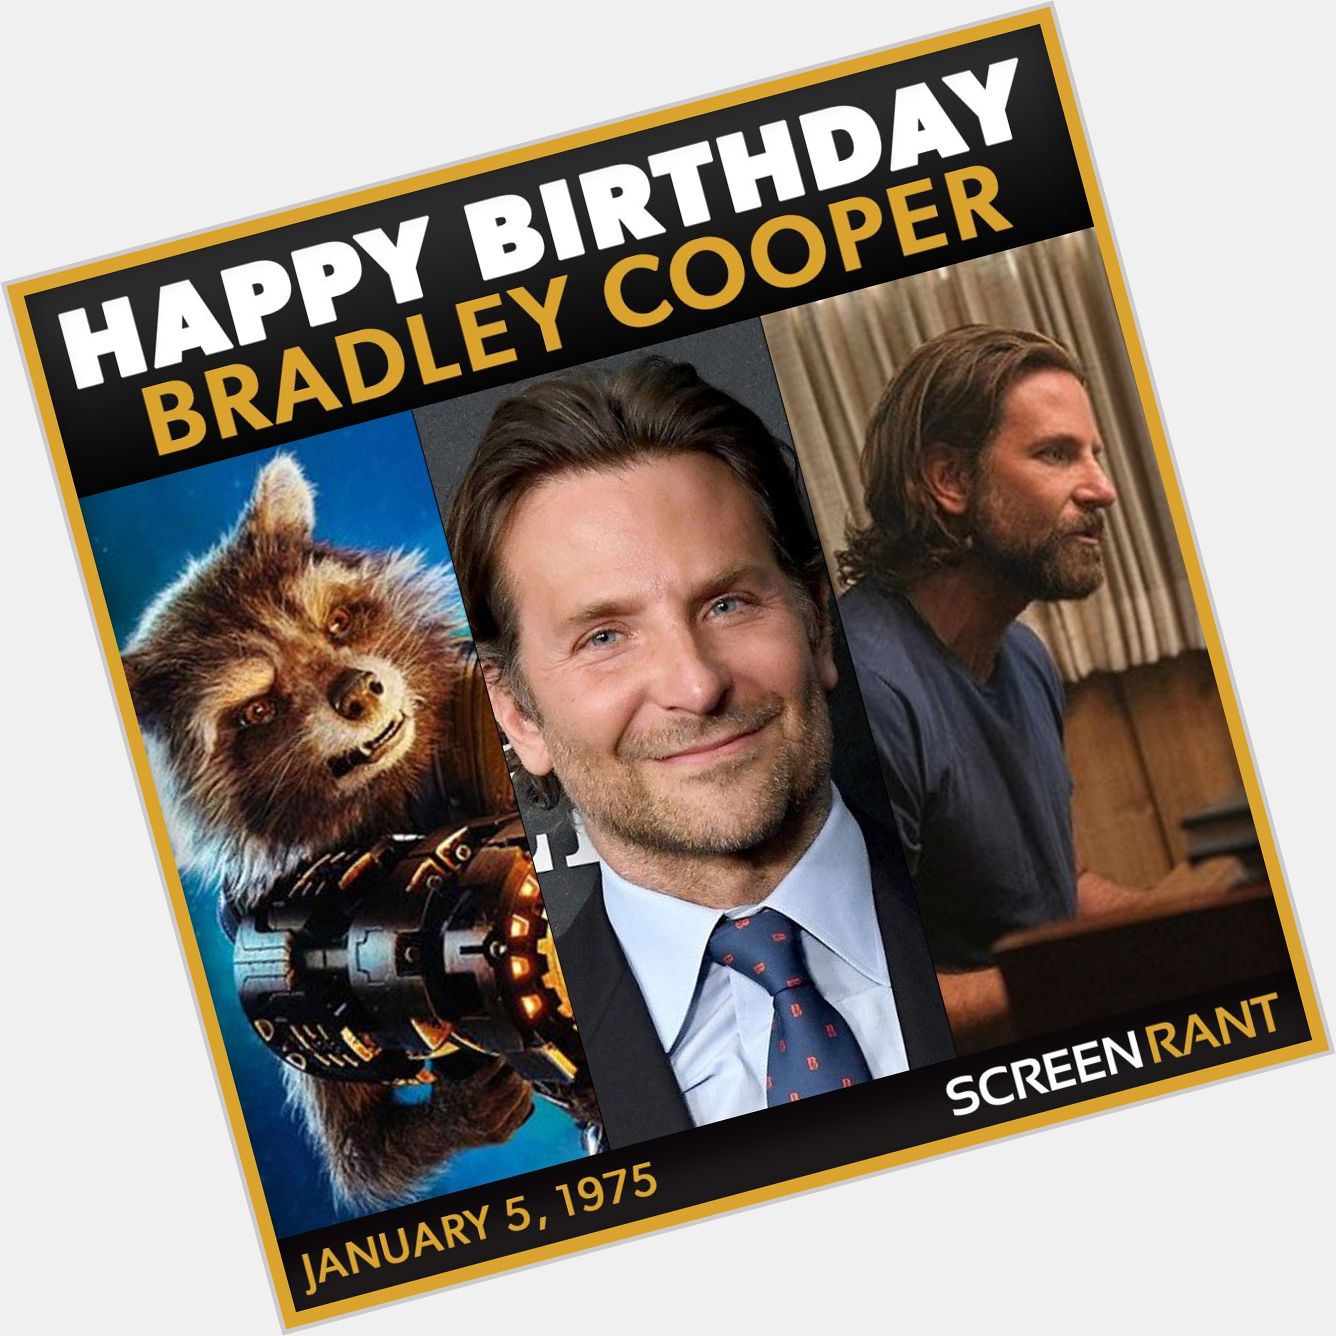 Happy Birthday to the great Bradley Cooper! Share some of your favorite Bradley Cooper roles with us! 